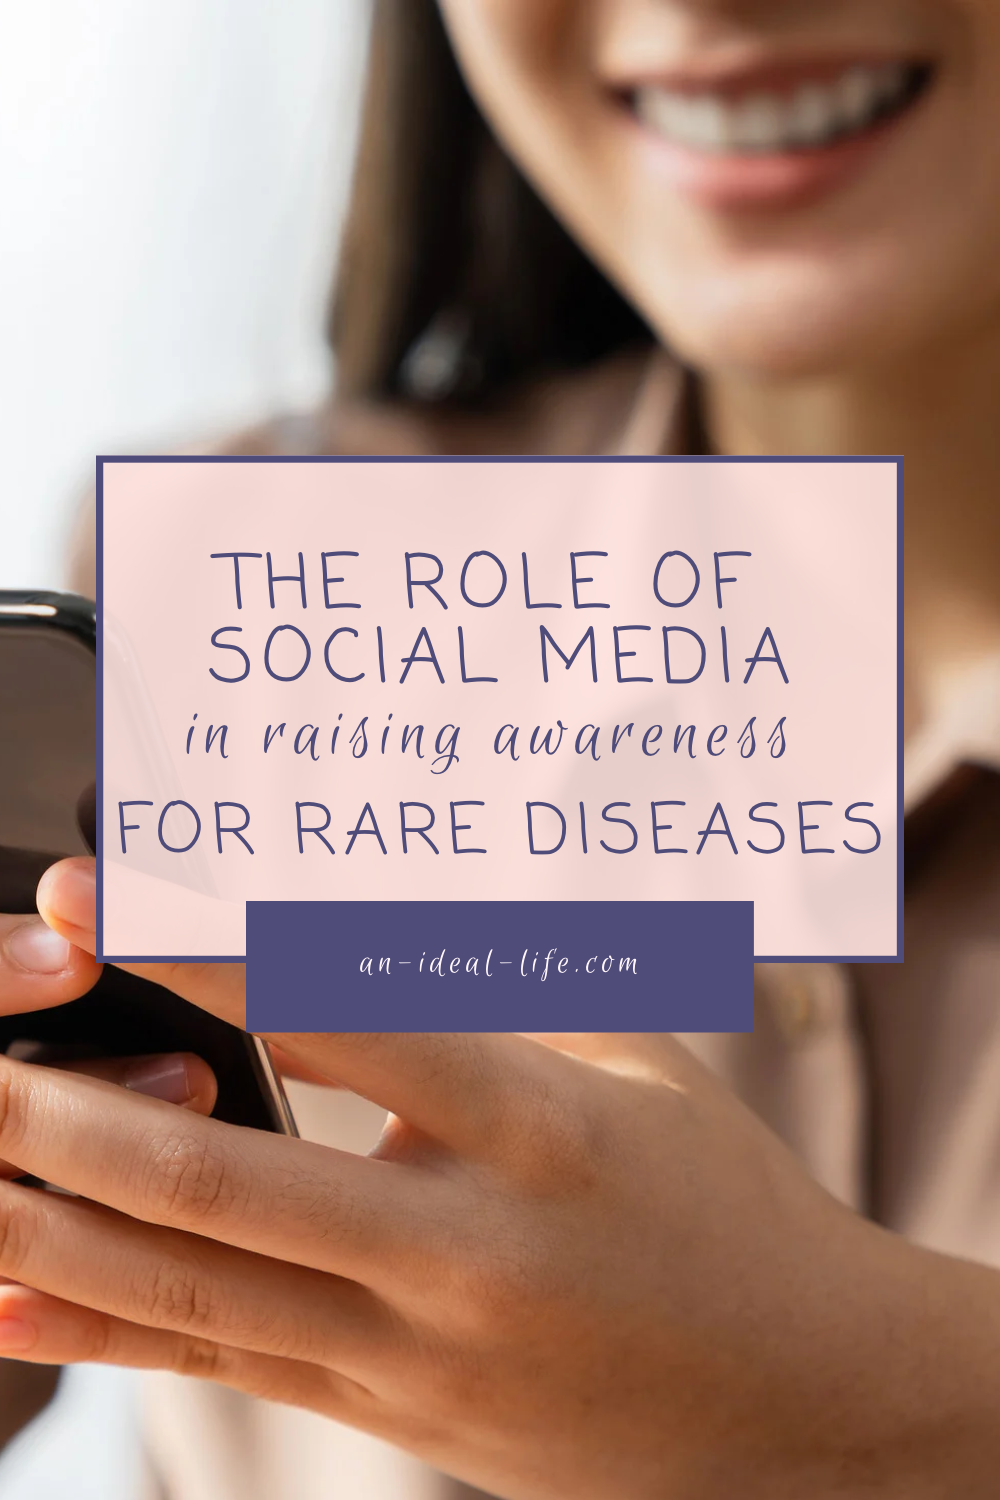 The Role of Social Media in Raising Awareness for Rare Diseases